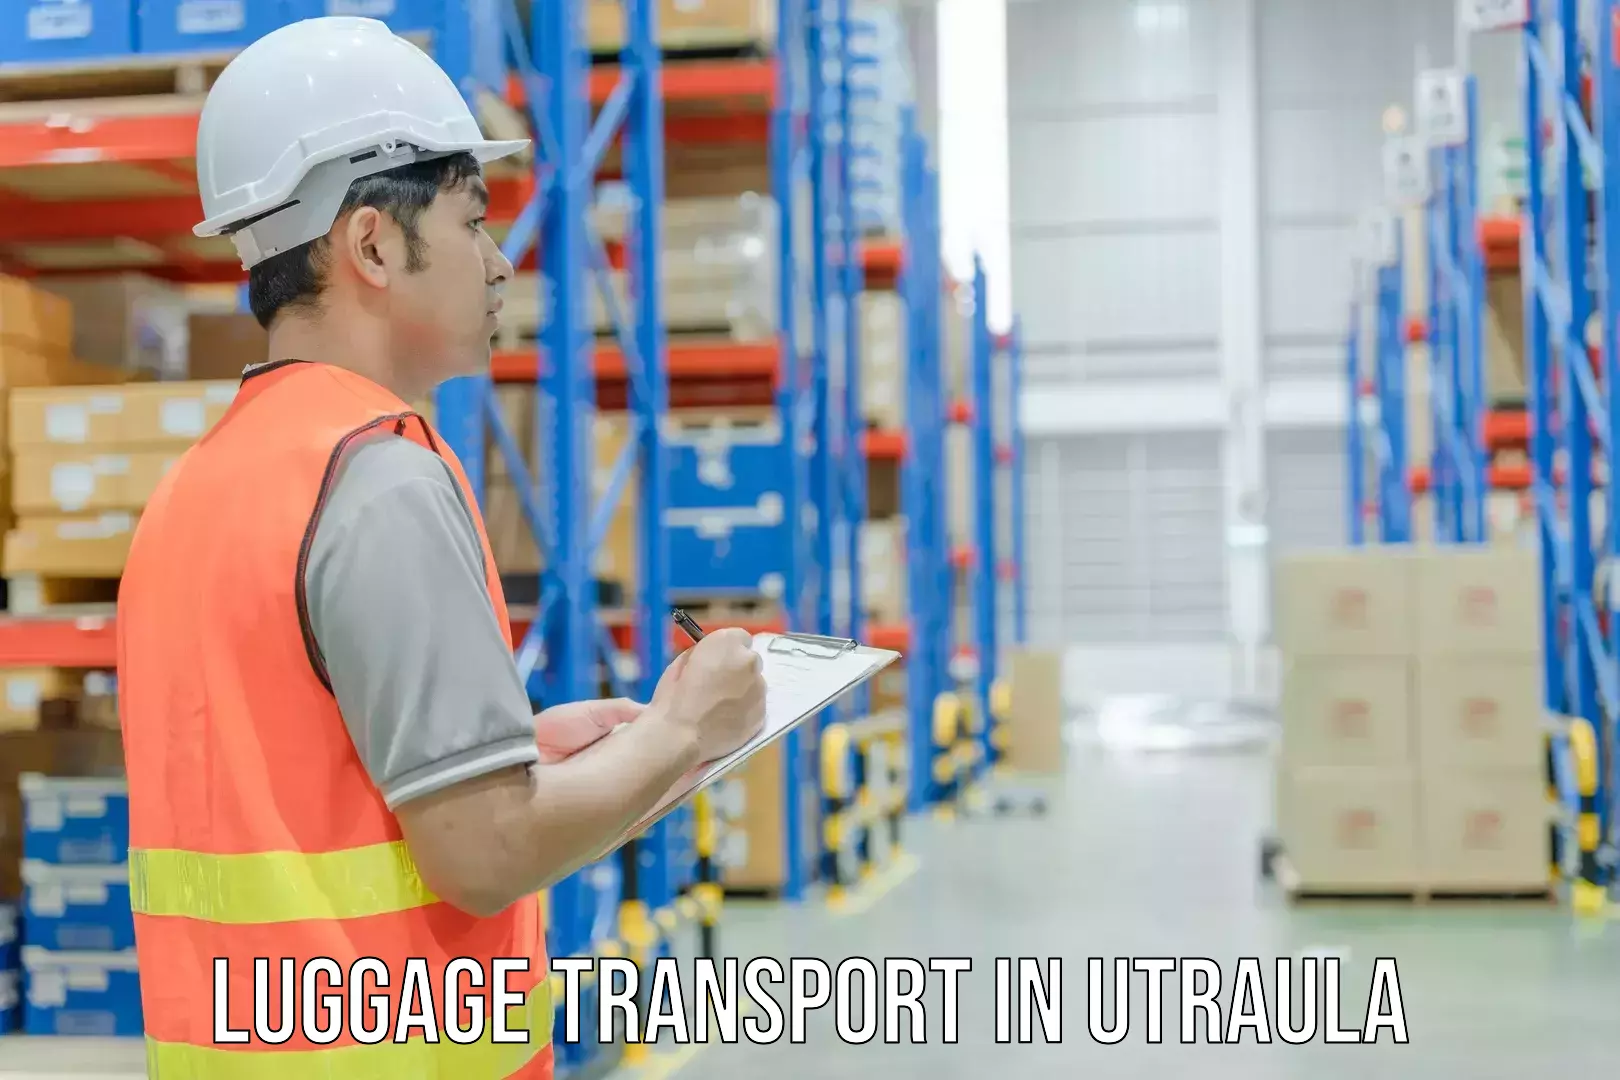 Luggage transport consultancy in Utraula